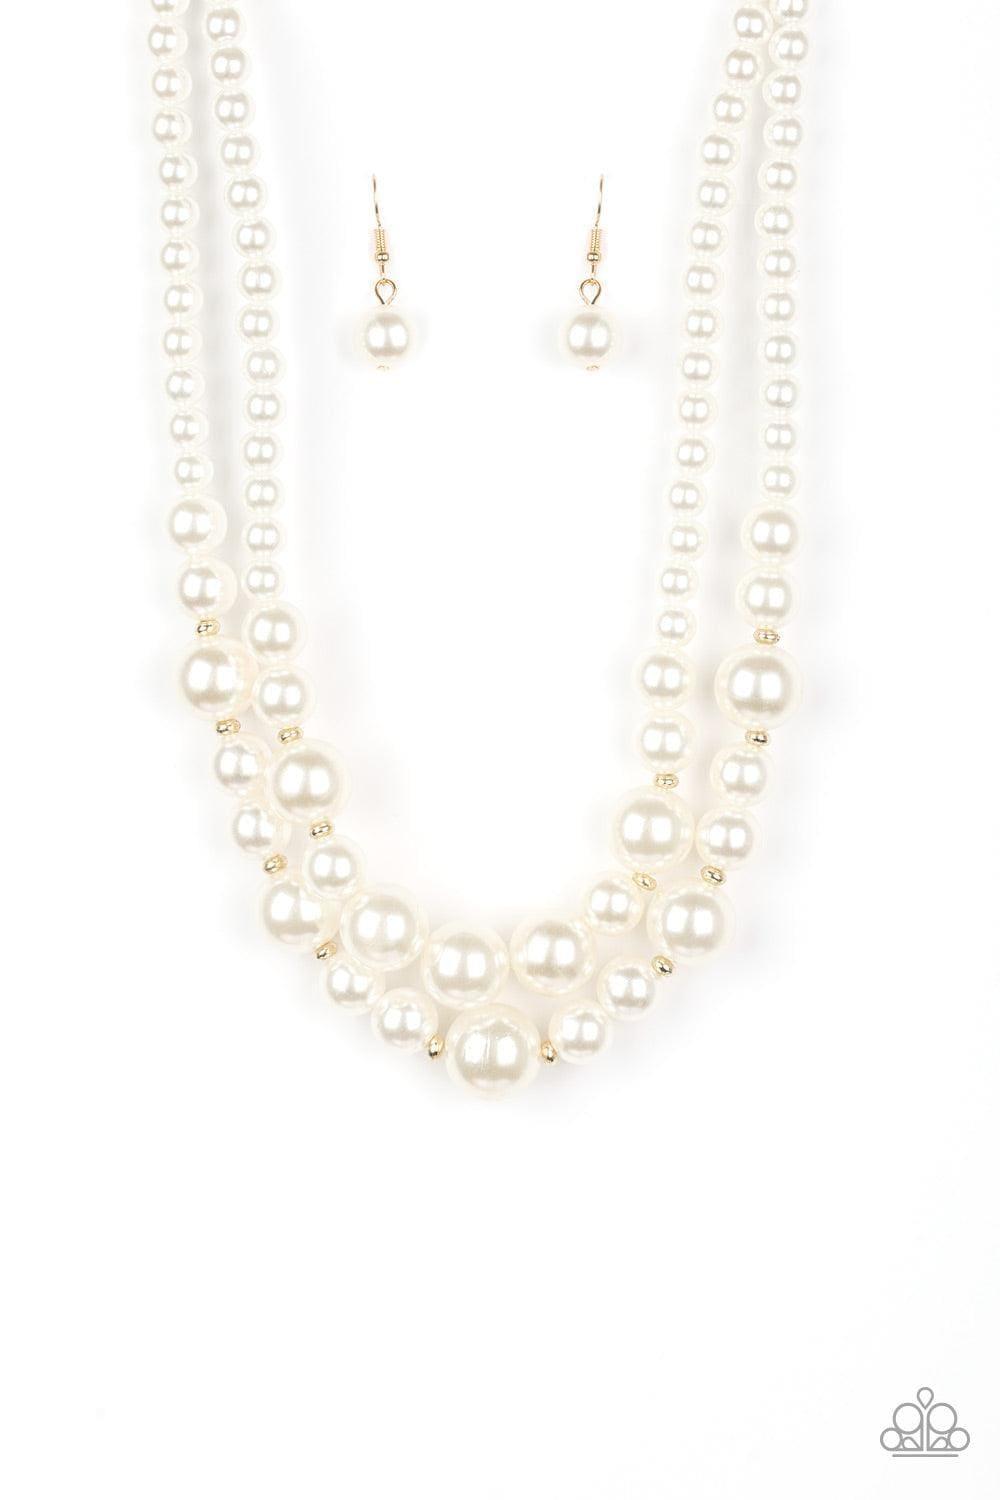 Paparazzi Accessories - The More The Modest - Gold Necklace - Bling by JessieK